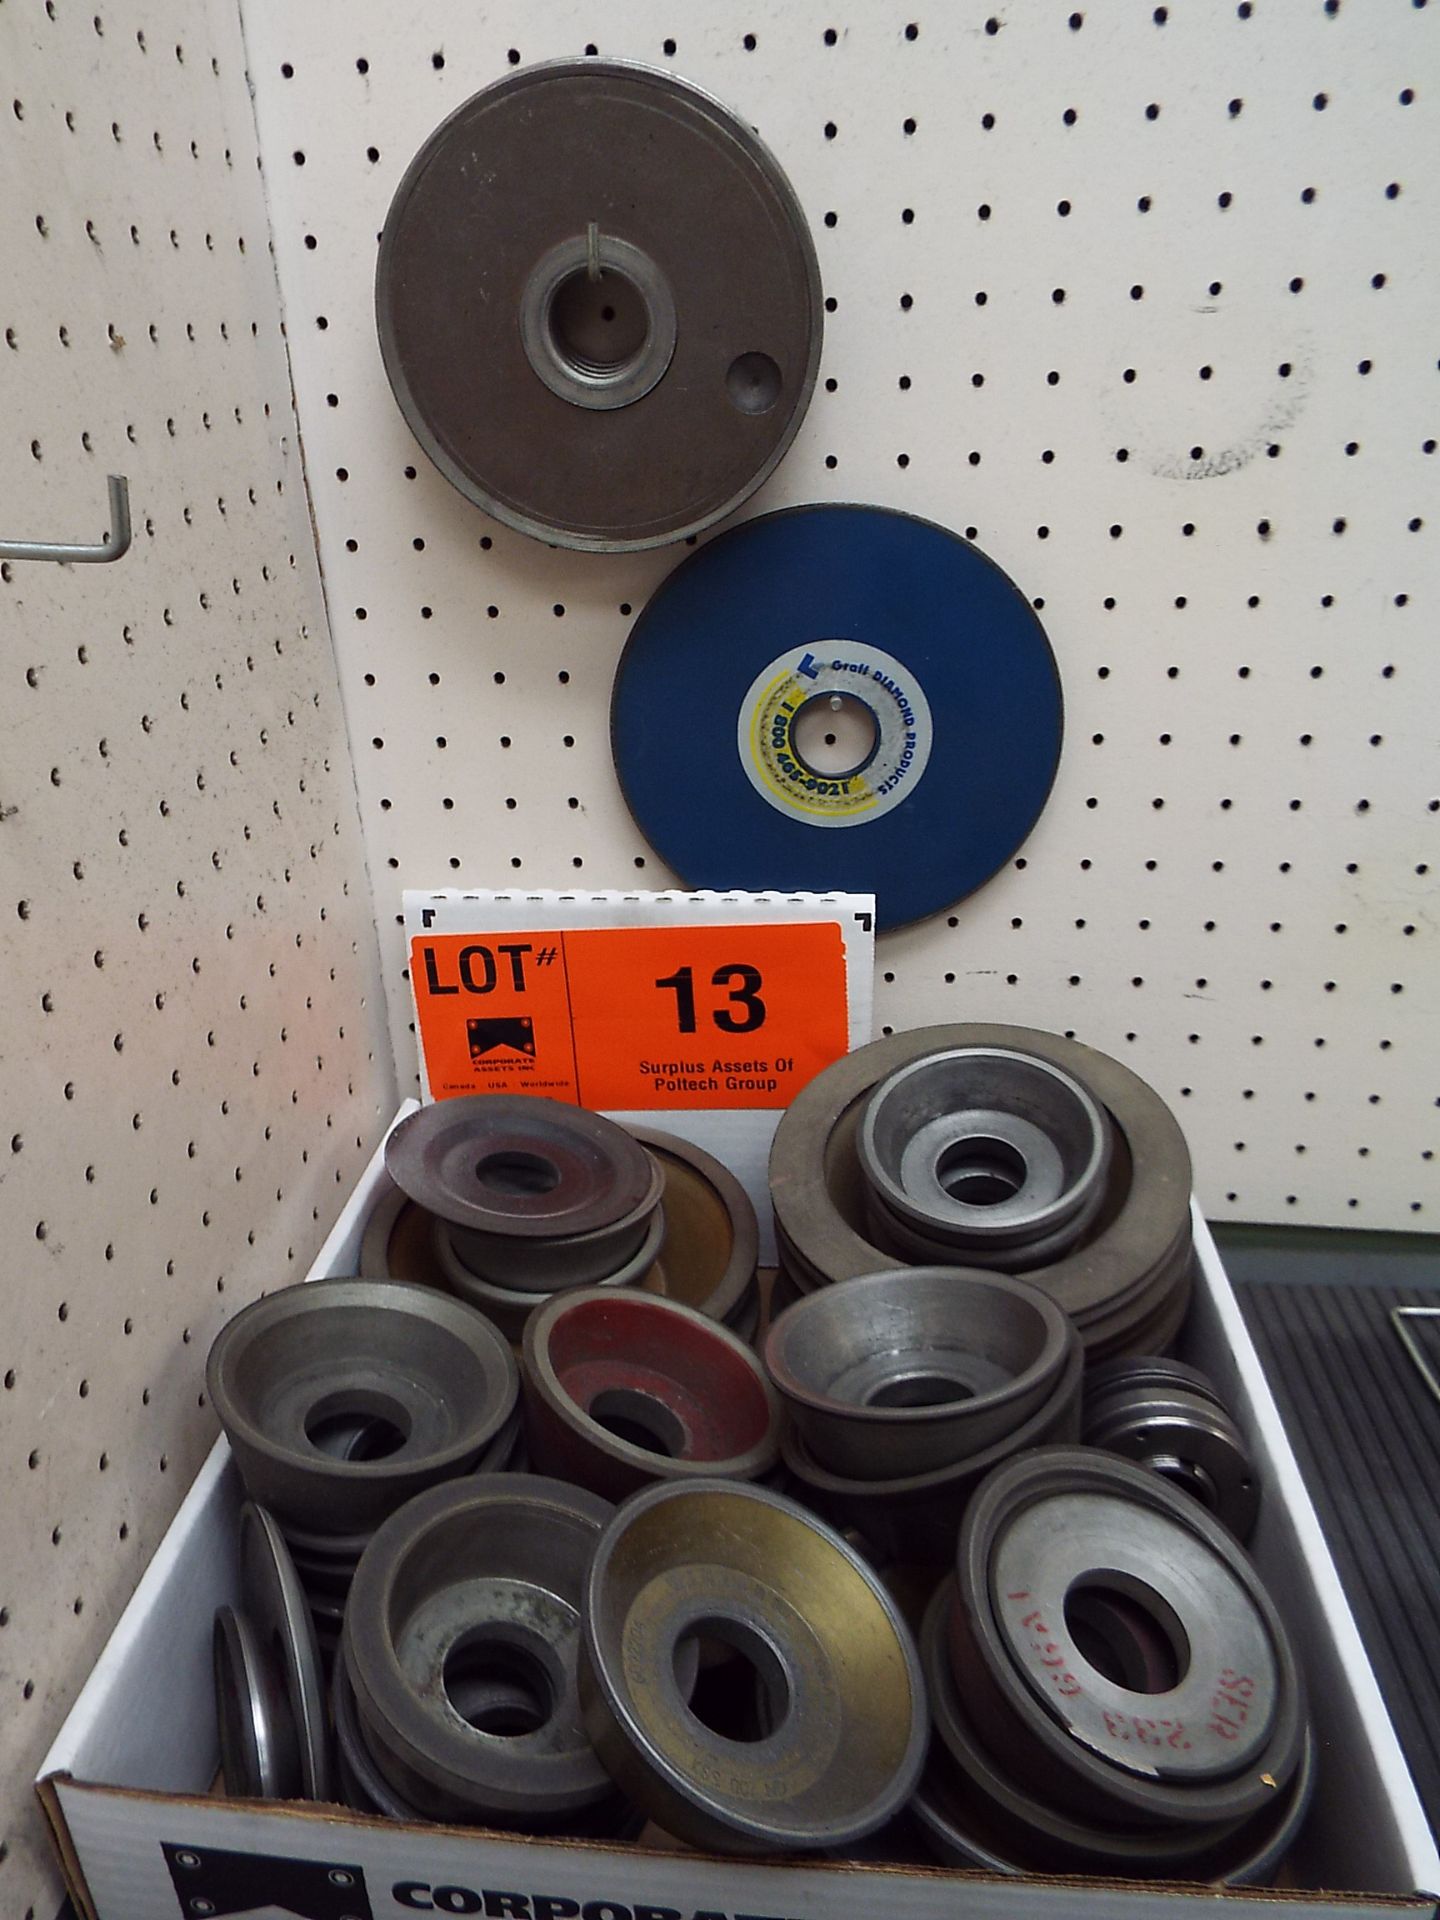 LOT/ DIAMOND WHEEL GRINDING DISCS (LOCATED AT 460 SIGNET DR, NORTH YORK, ON)